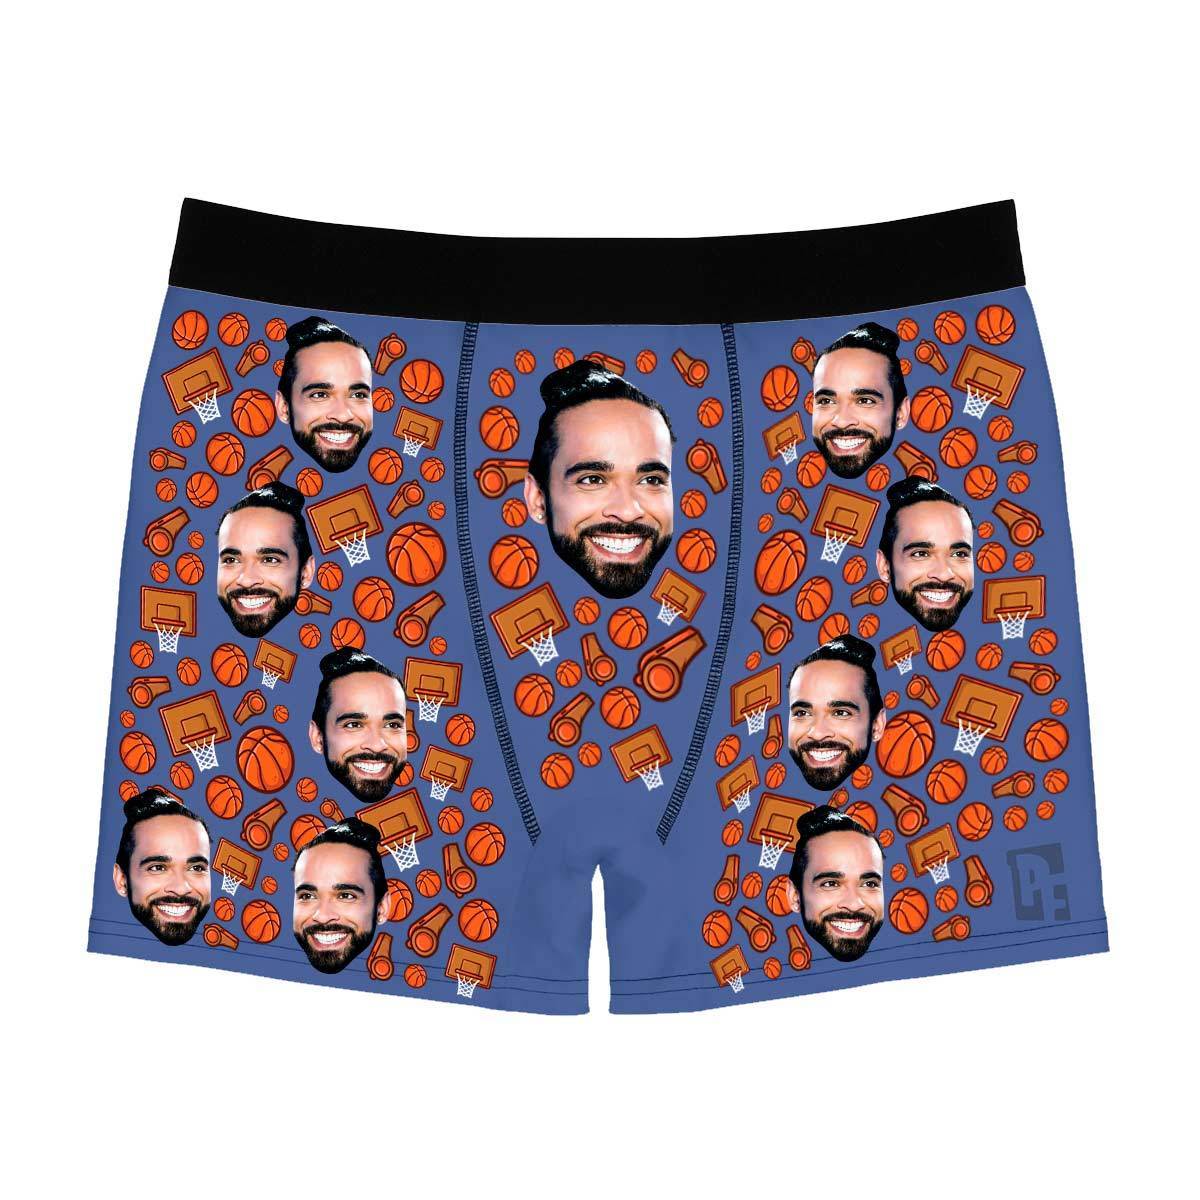 Darkblue Basketball men's boxer briefs personalized with photo printed on them